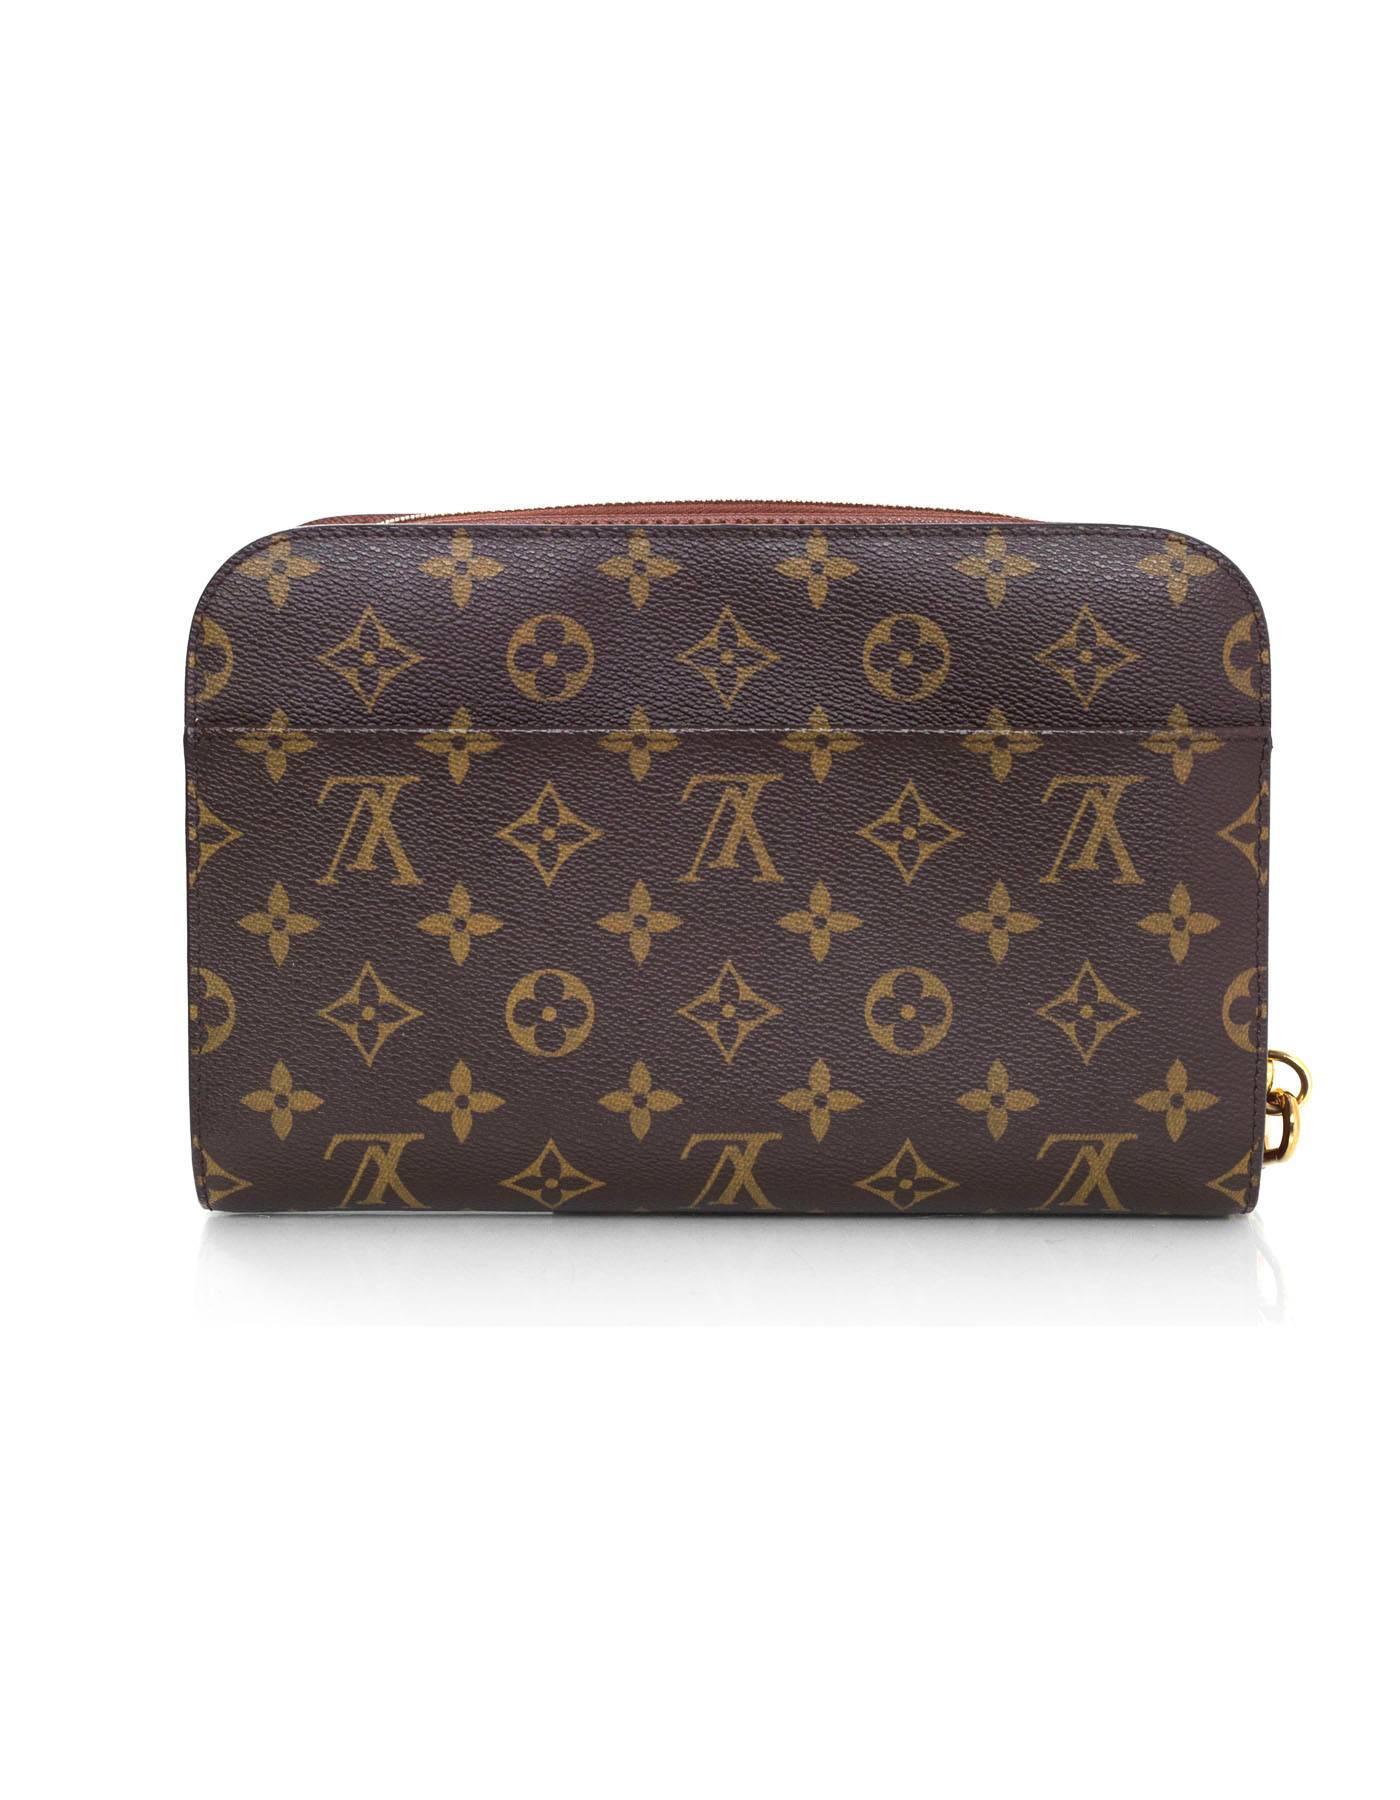 lv orsay clutch review